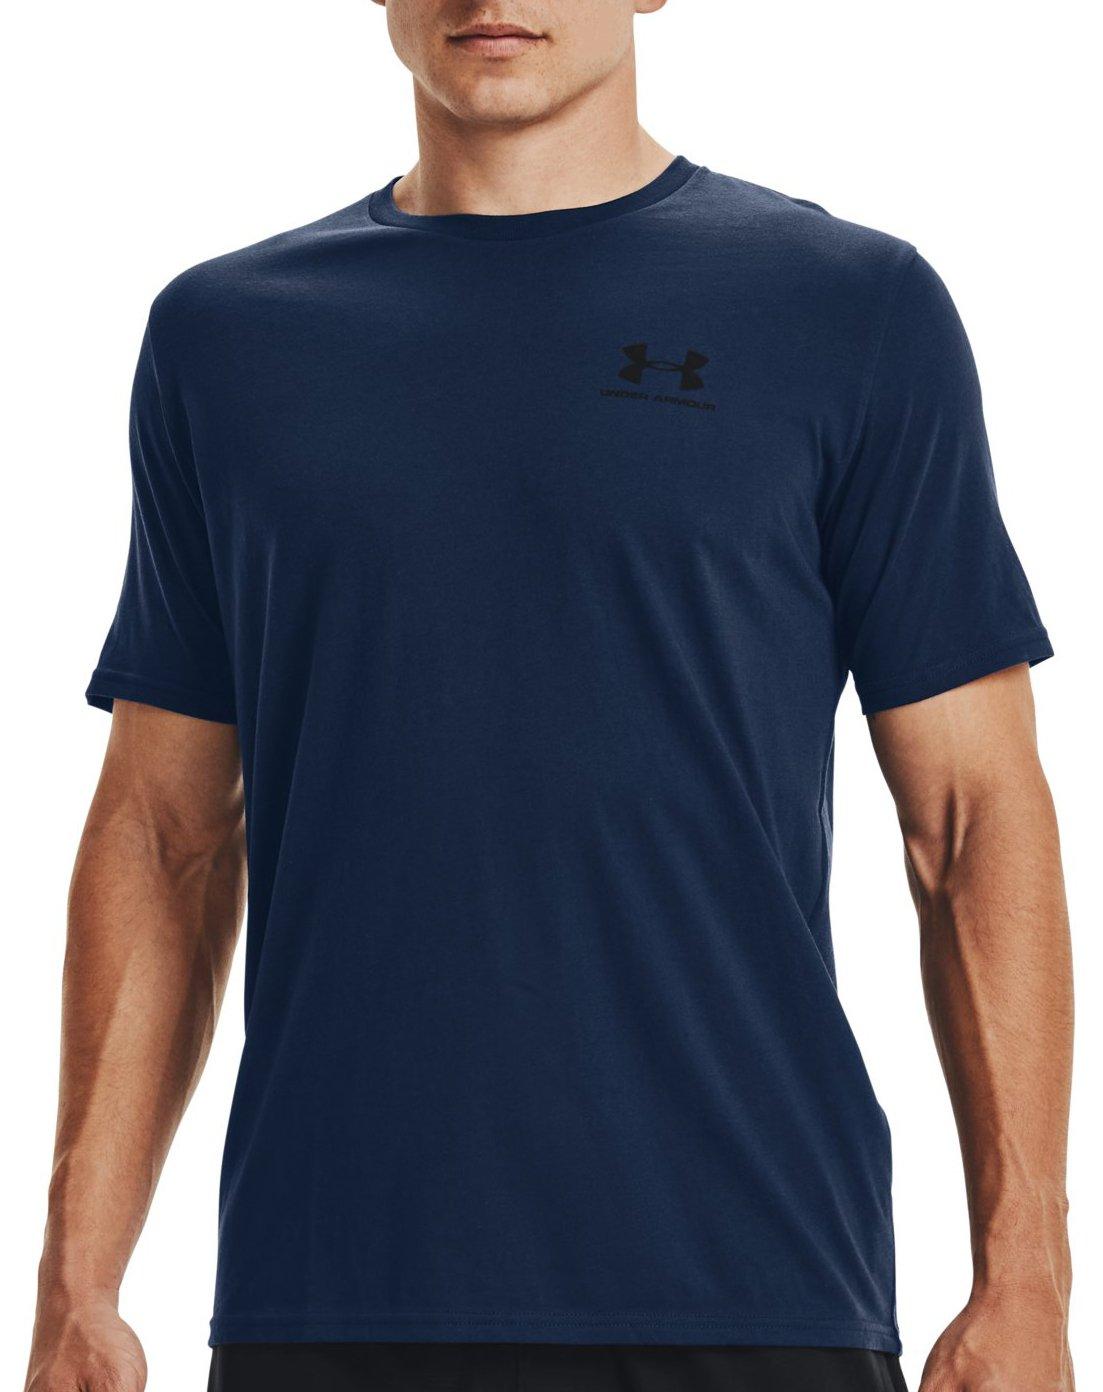 Mens Under Armour Sports Style Short Sleeve Tee